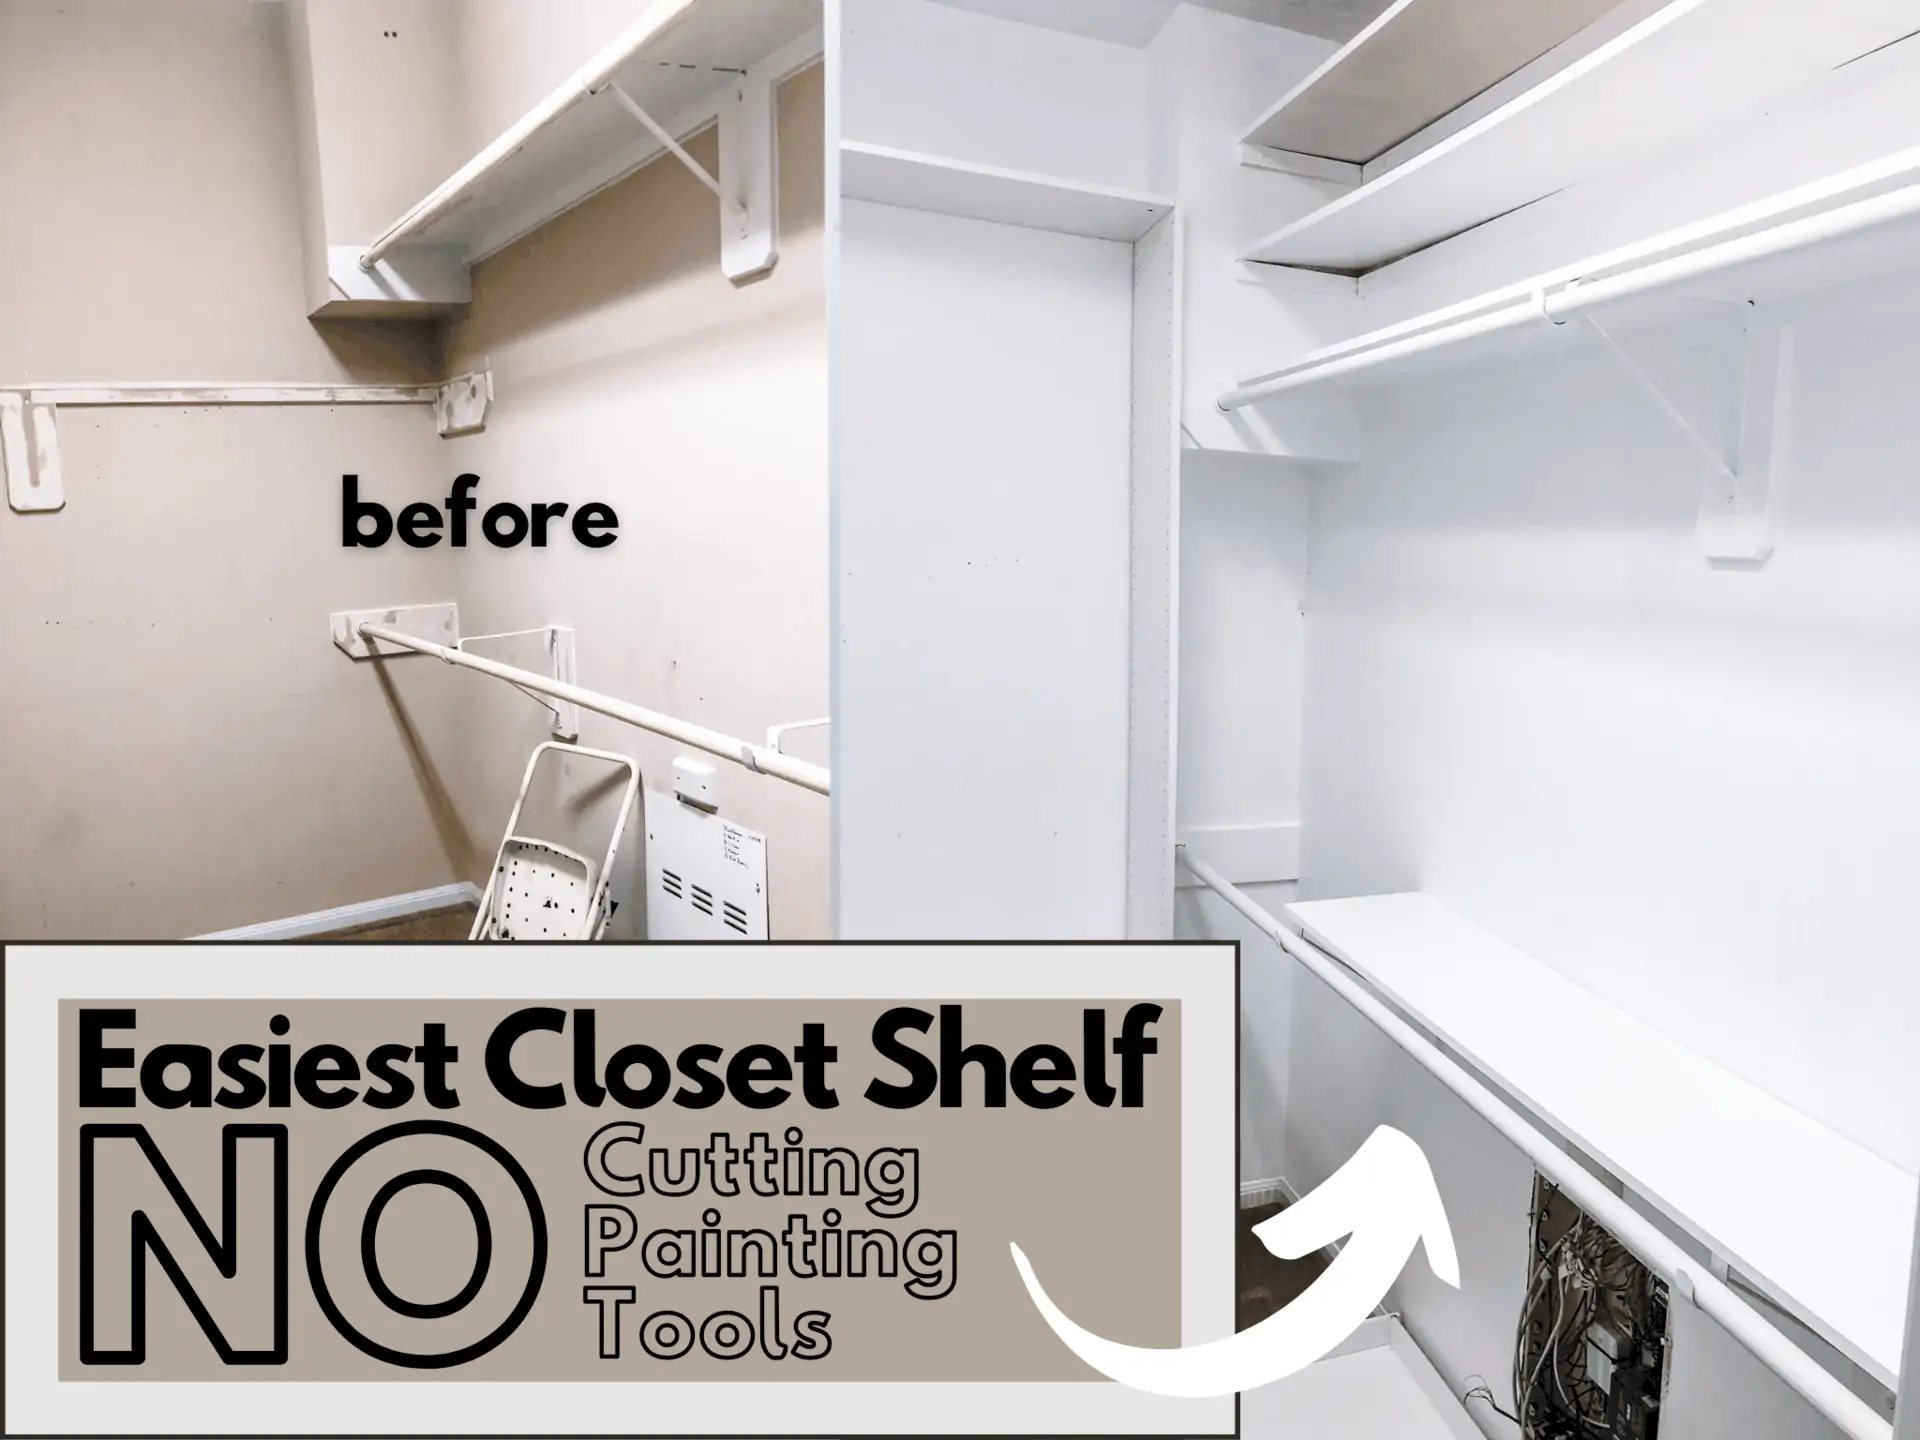 https://www.thediyvibe.com/wp-content/uploads/2021/09/Easiest-closet-shelf-no-cutting-tools-or-painting.webp